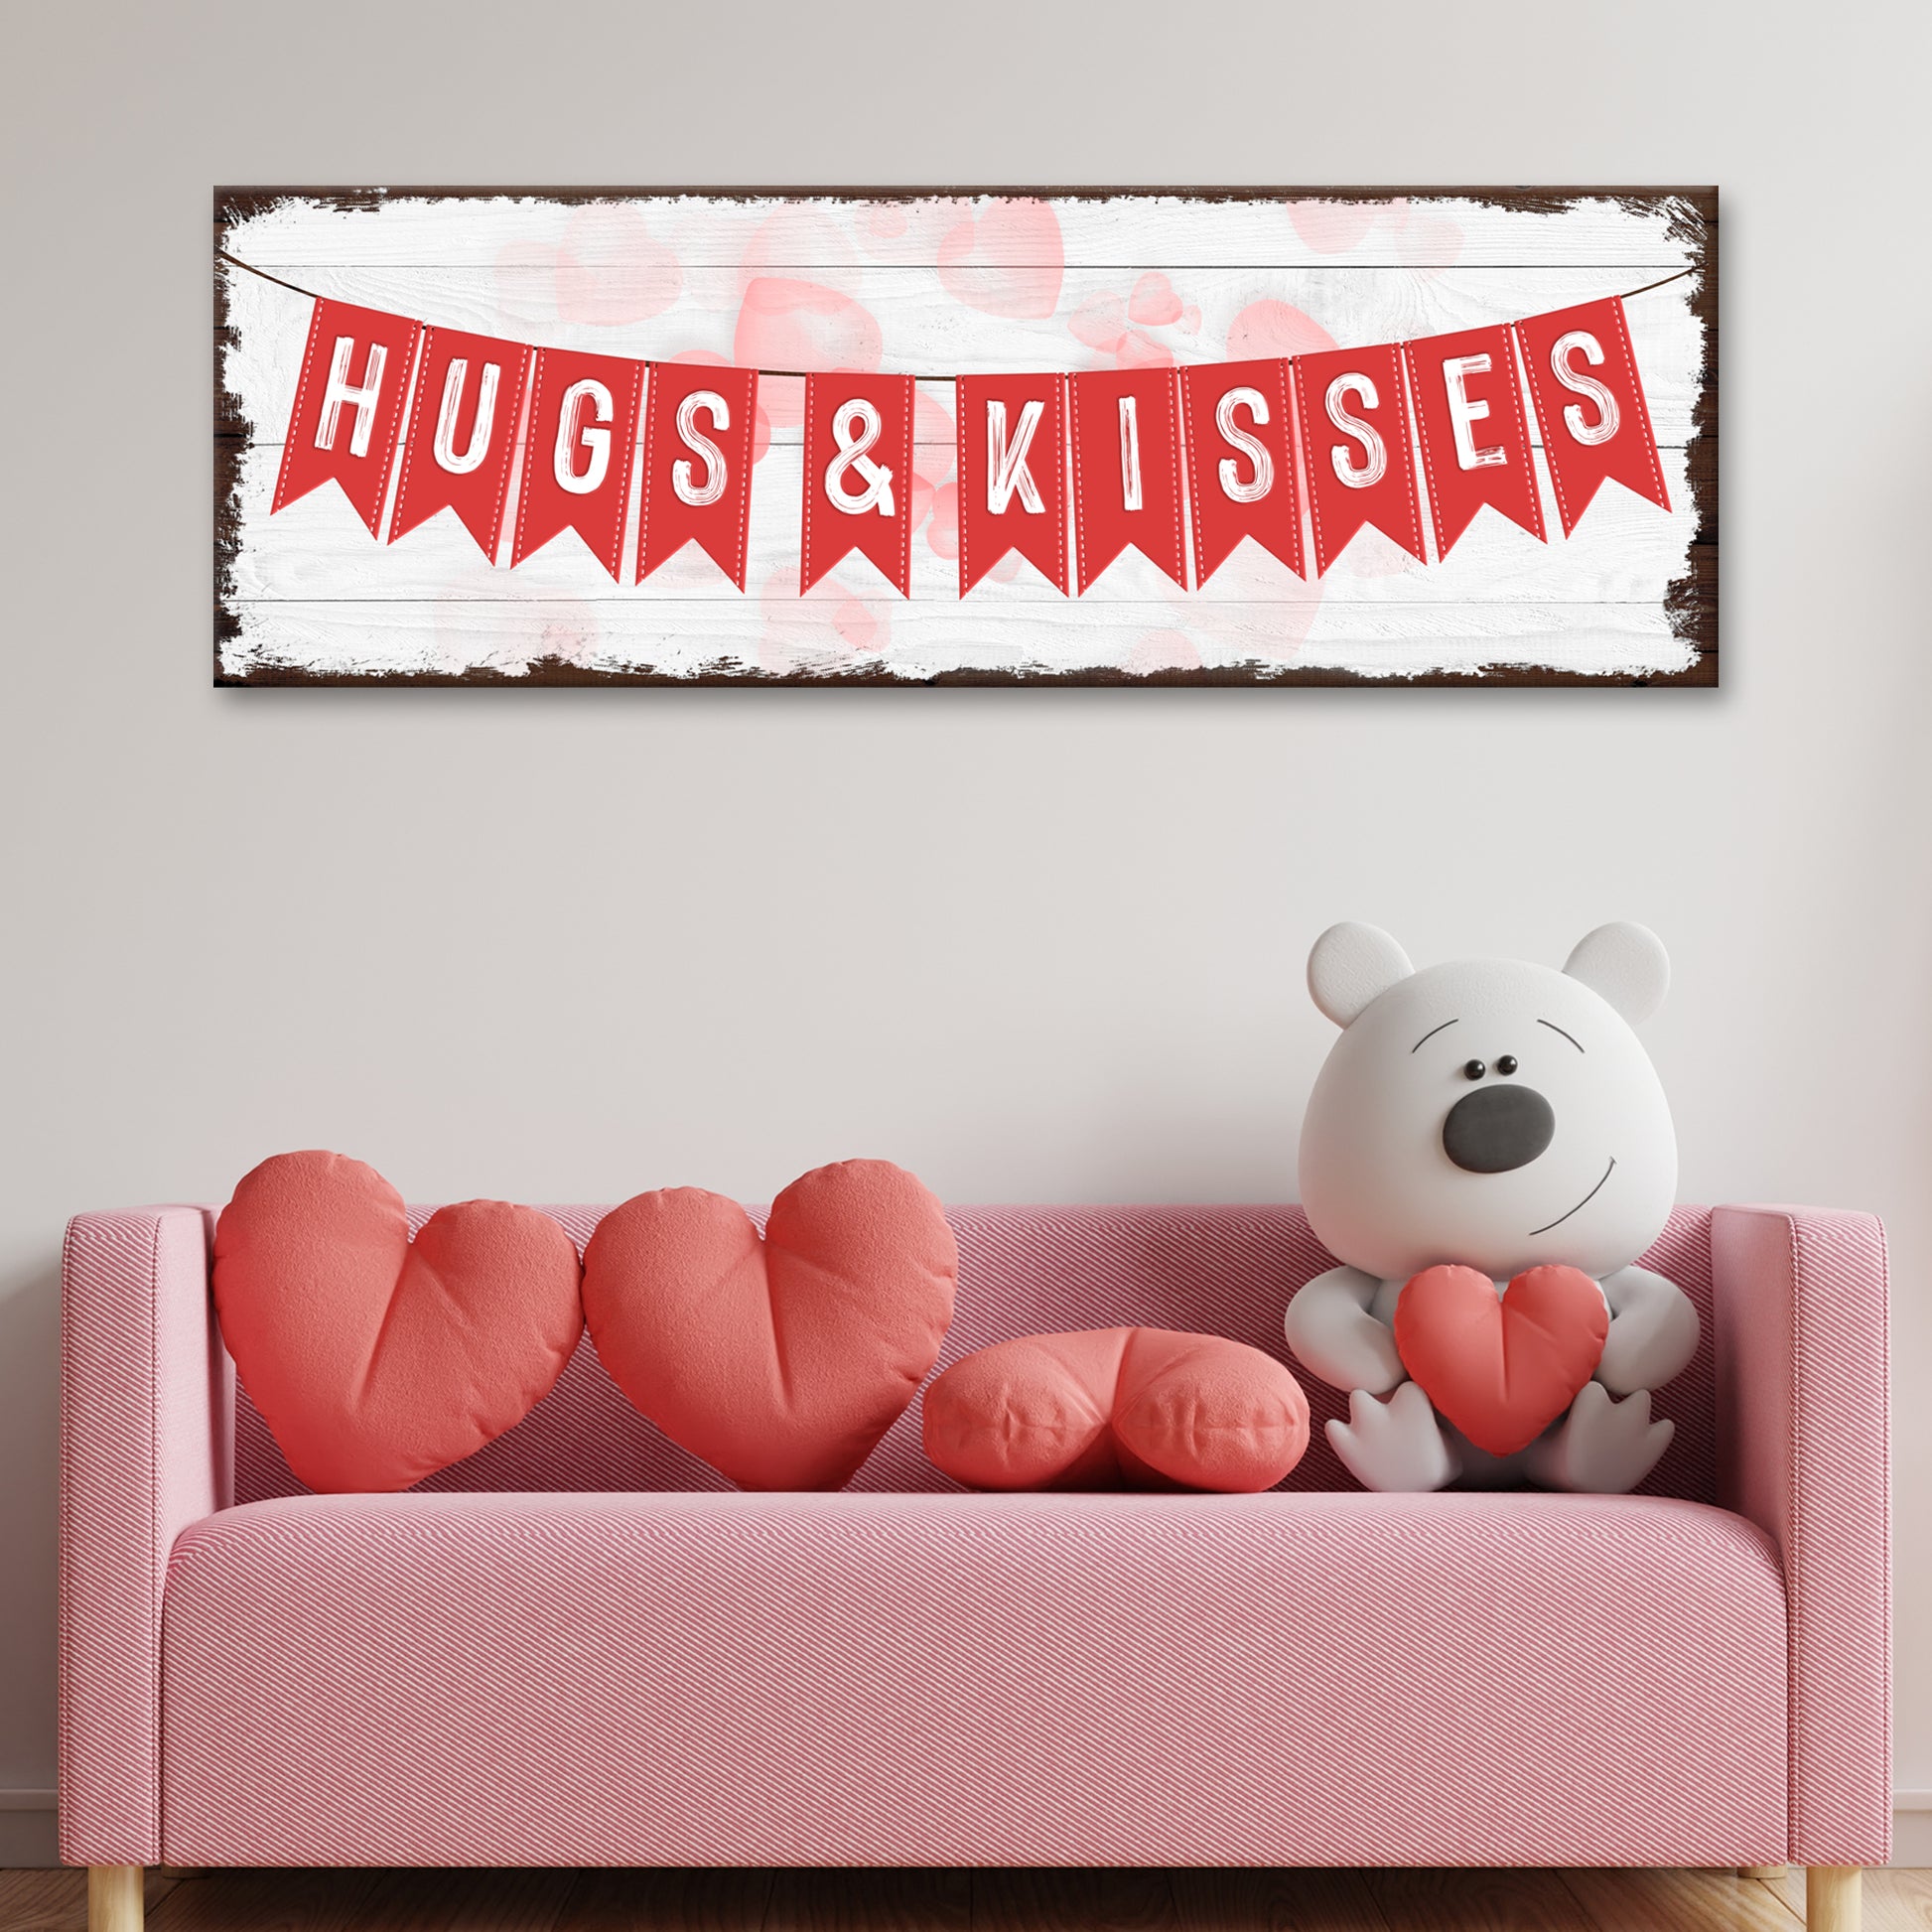 Rustic Valentine Banner Sign - Image by Tailored Canvases